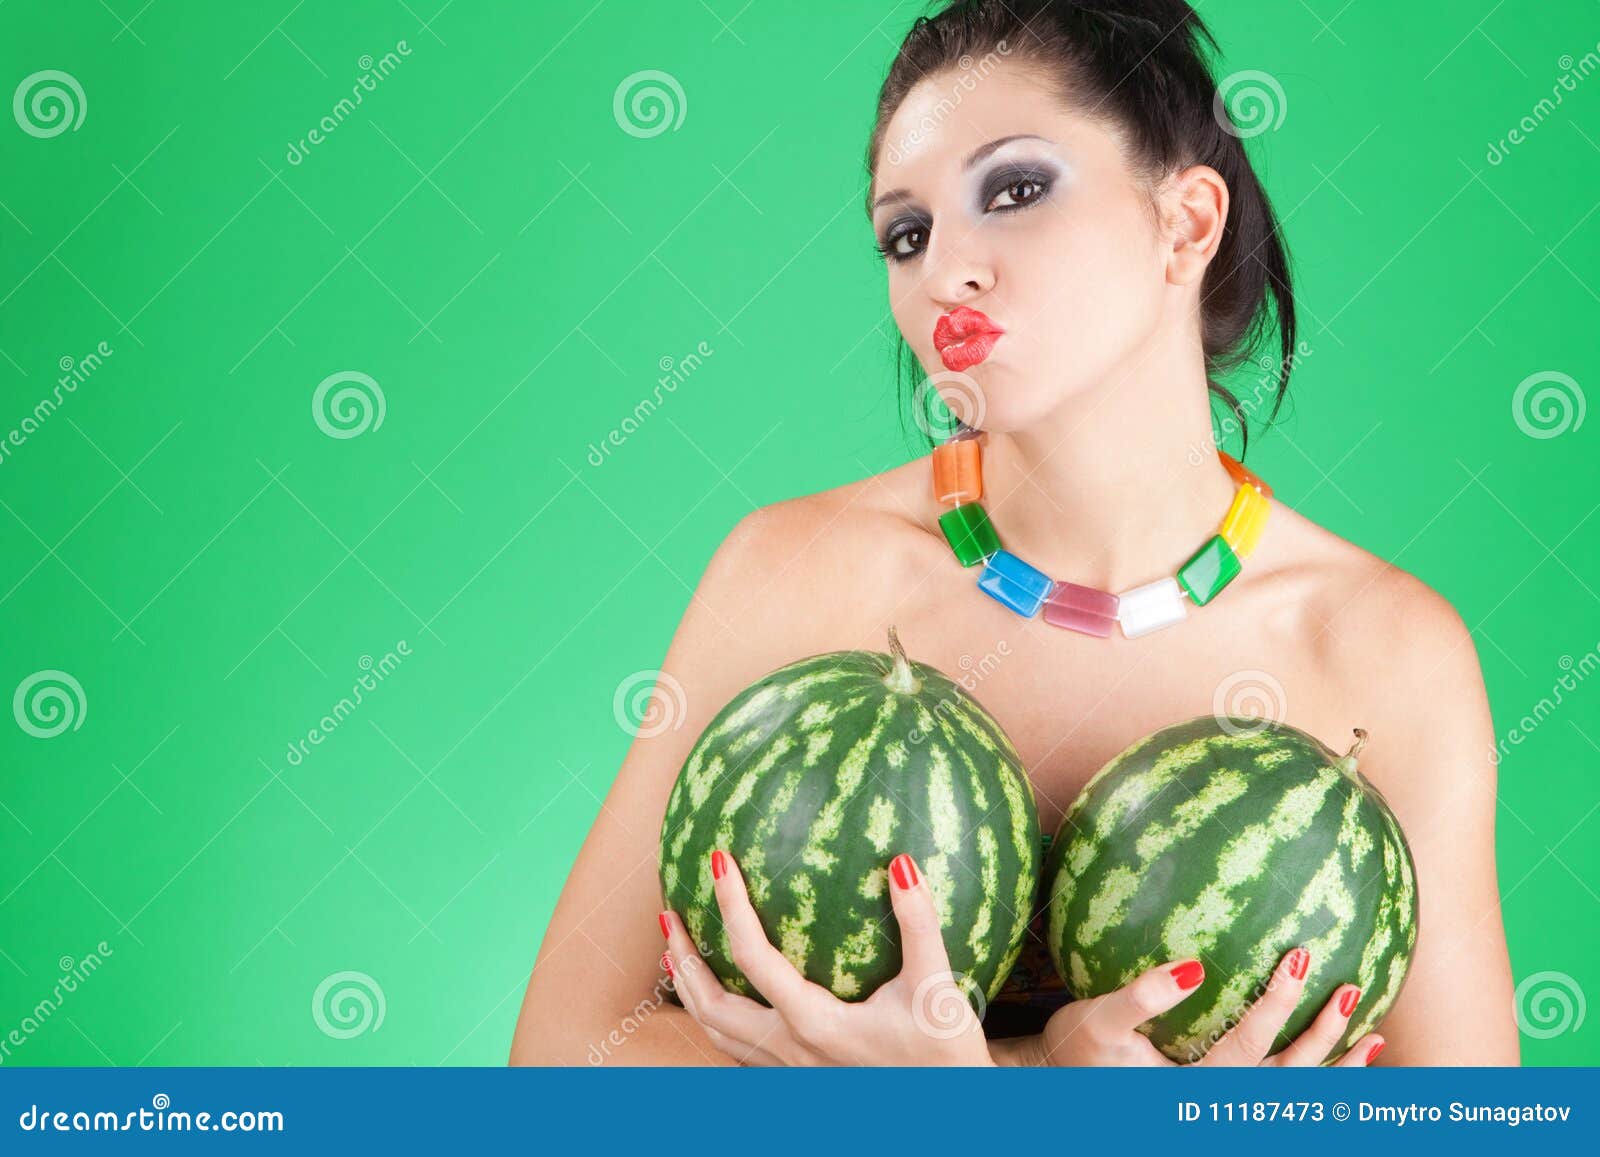 Fun Woman With Watermelons Stock Photos Image